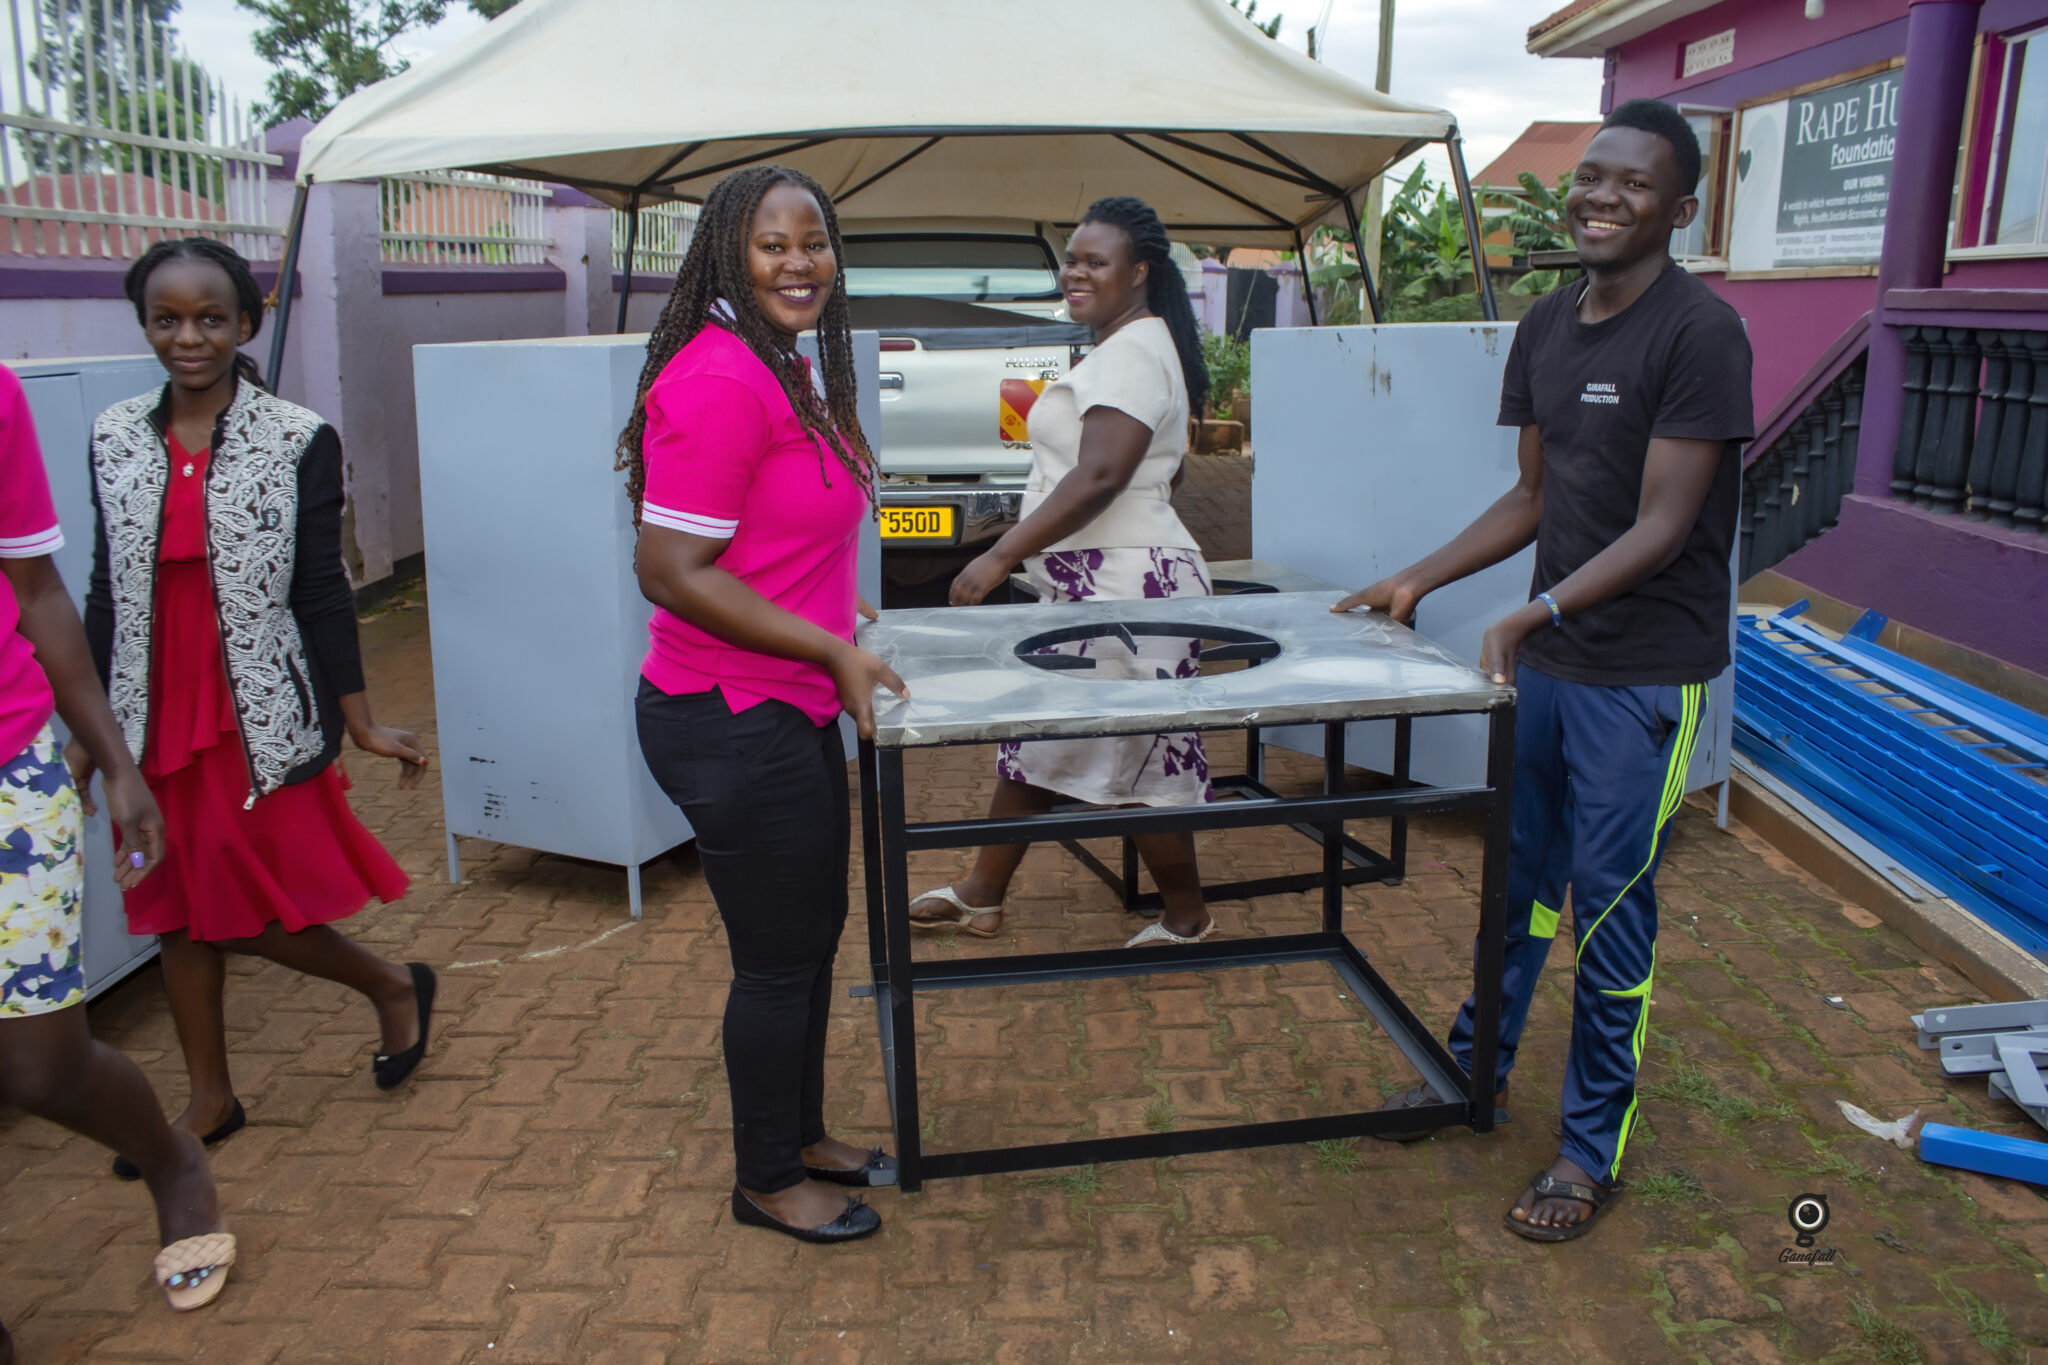 Rape Hurts Foundation staff set up Lytefire solar ovens funded by the Solar Electric Light Fund